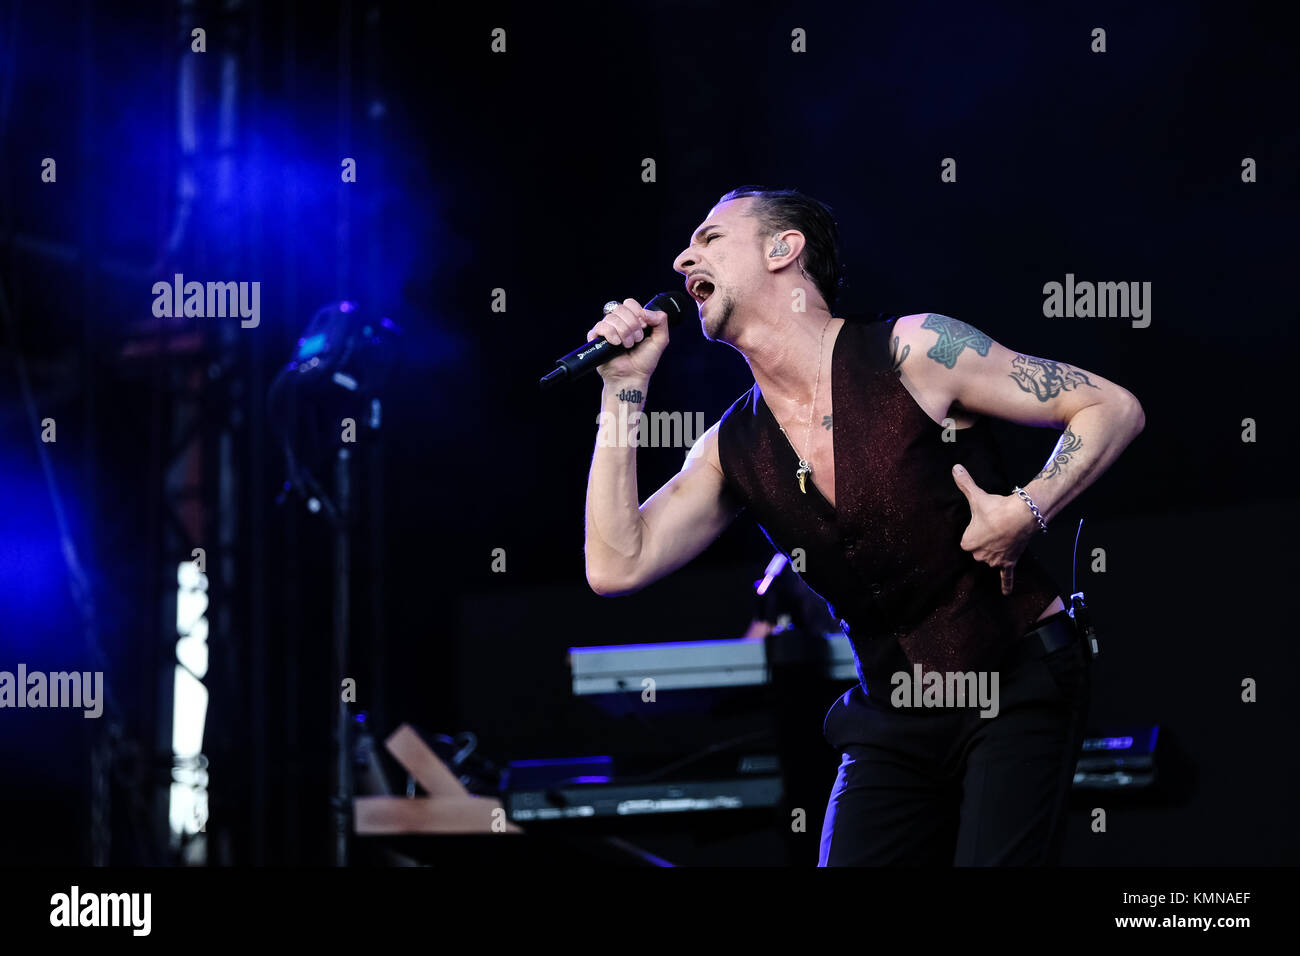 The English electronic band Depeche Mode performs a live concert at  Letzigrund Stadion in Zürich. Here singer and songwriter Dave Gahan is seen  live on stage. Switzerland, 18/06 2017 Stock Photo - Alamy